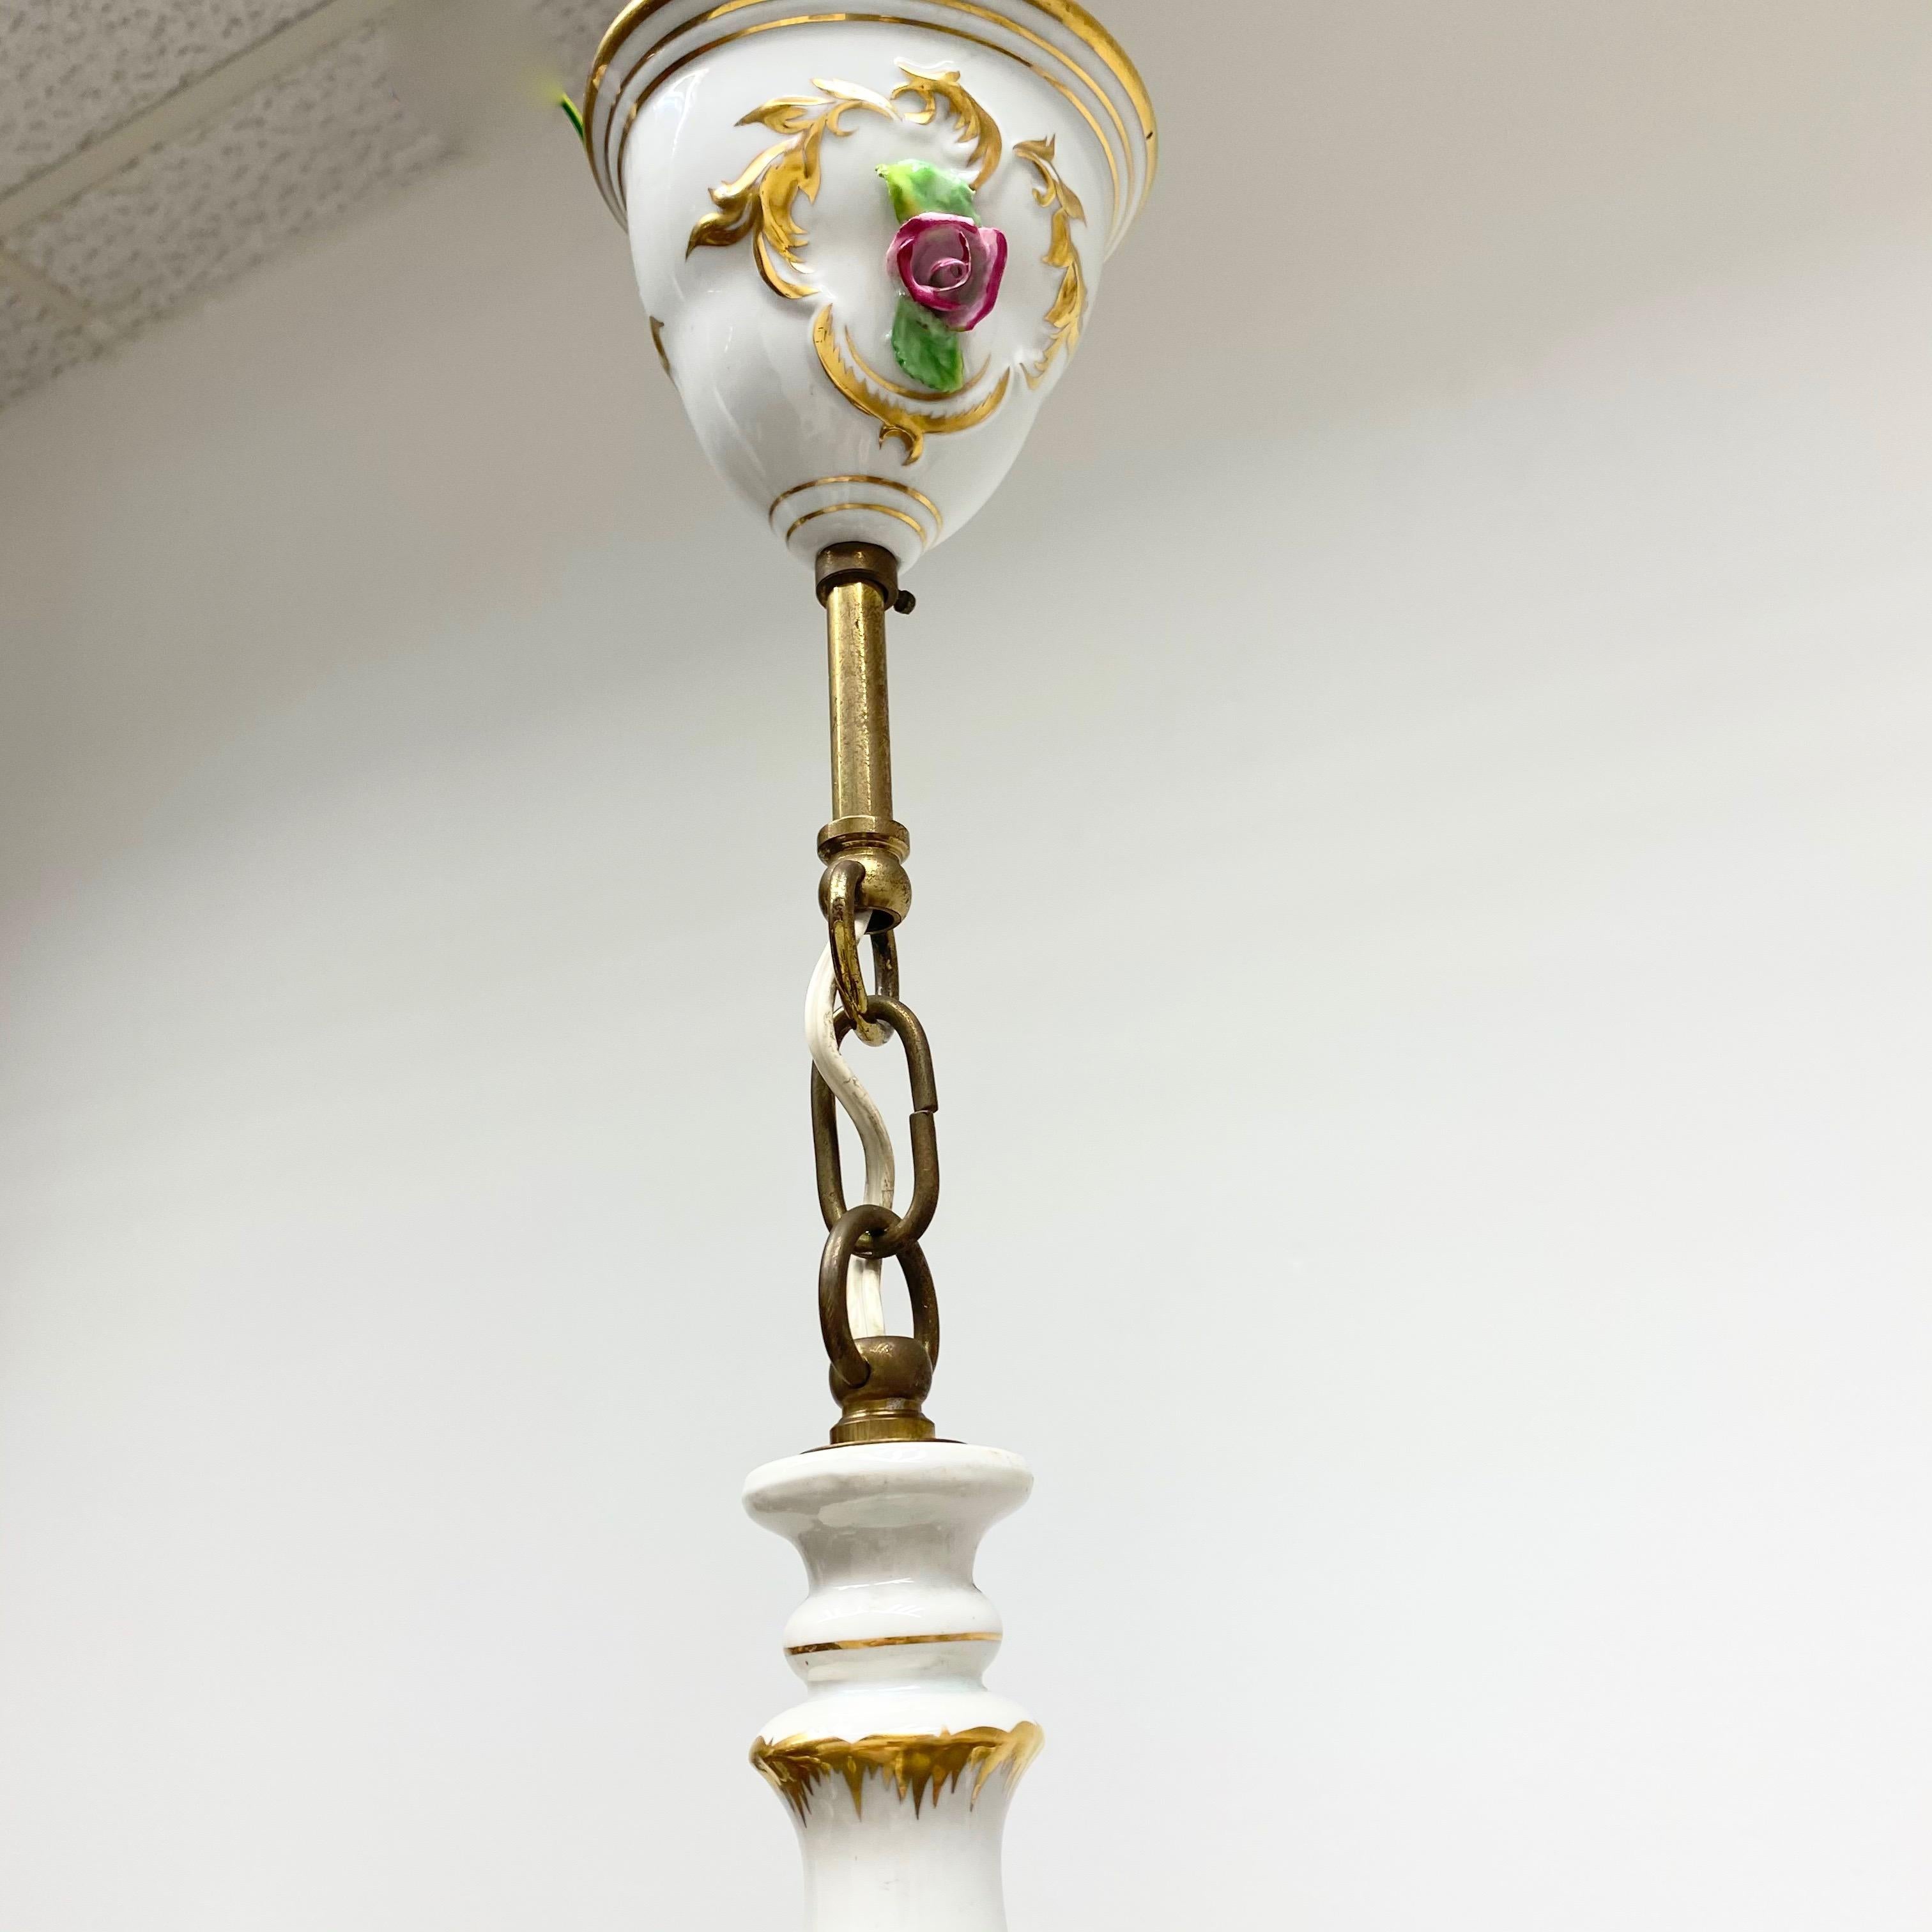 Metal Petite Chandelier Hand Painted and Gilded Porcelain, circa 1940 For Sale